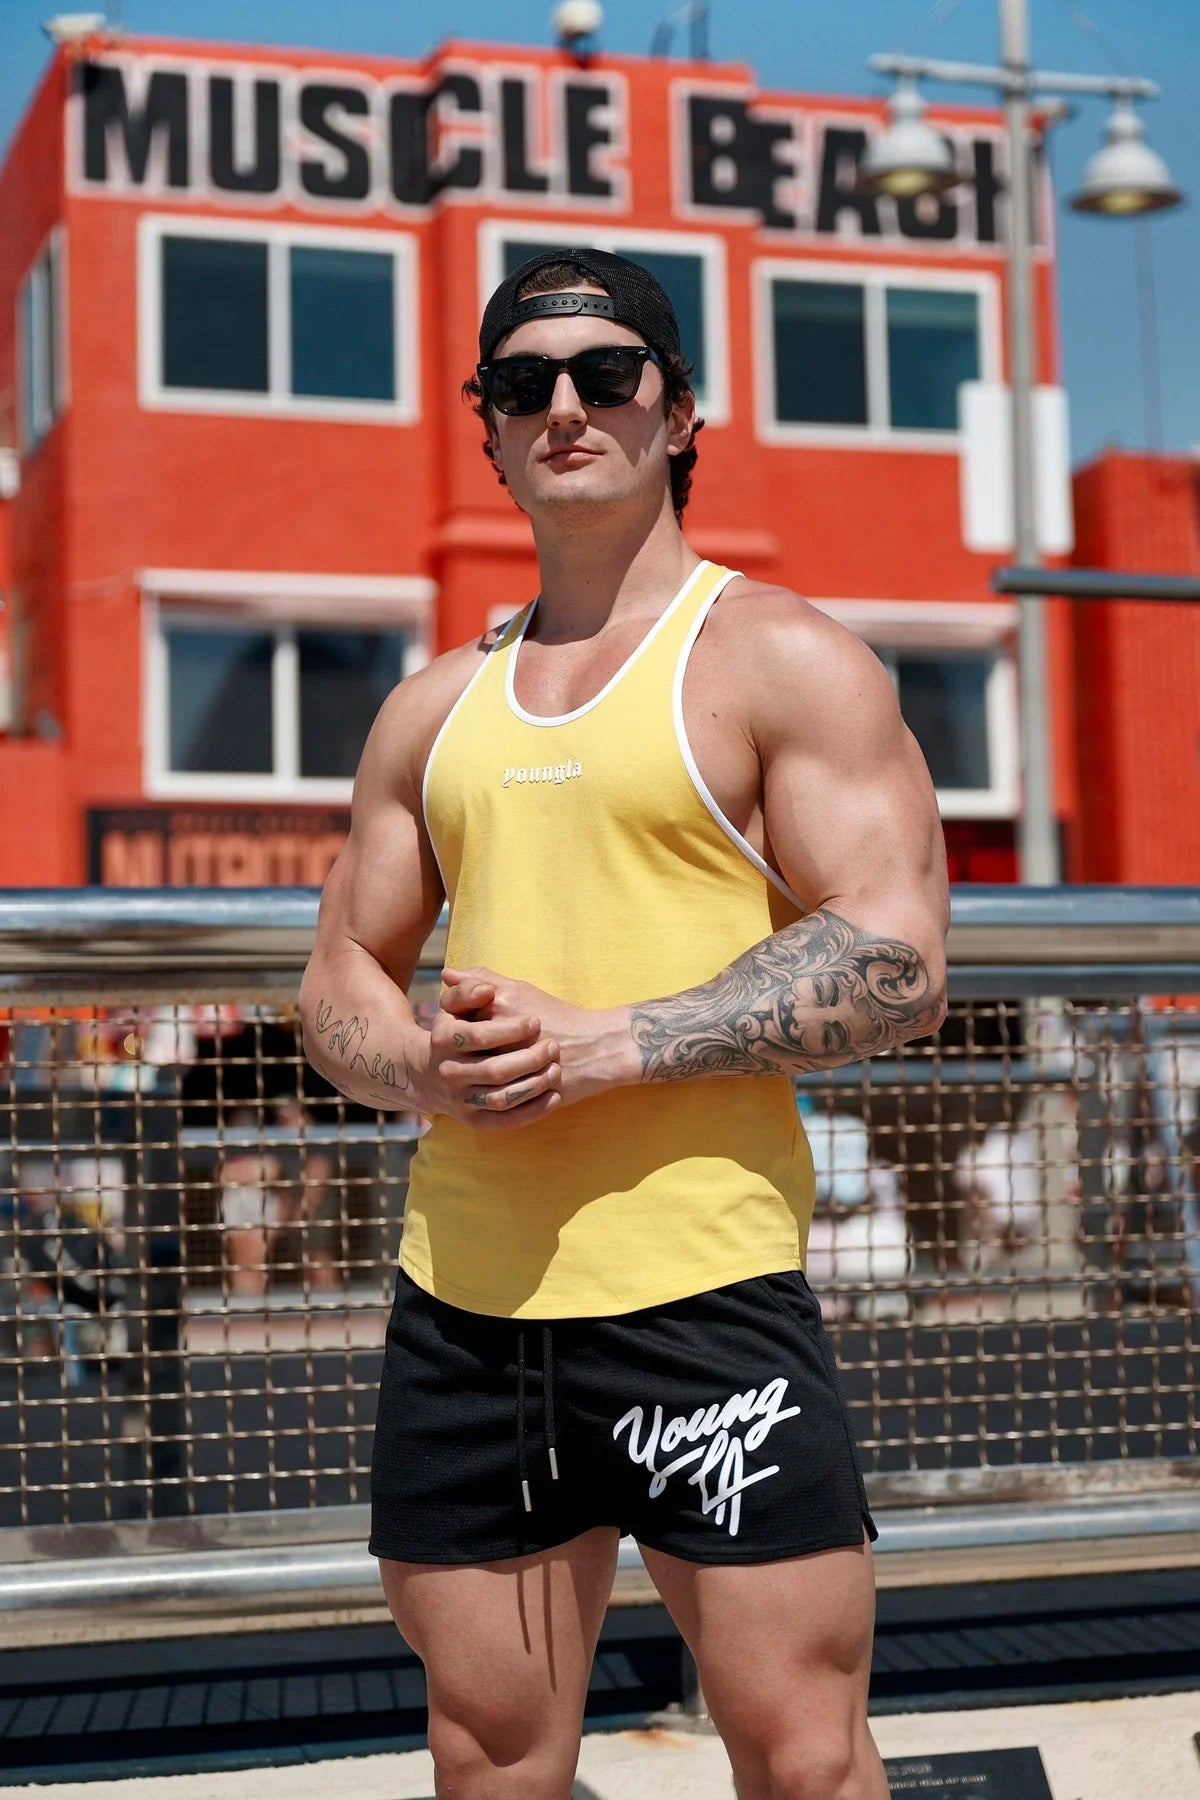 Gym Sports Fitness Men's Shorts American Style YA Clothing Brands Jogger Outdoor Running Basketball Training Shorts Beach Pants